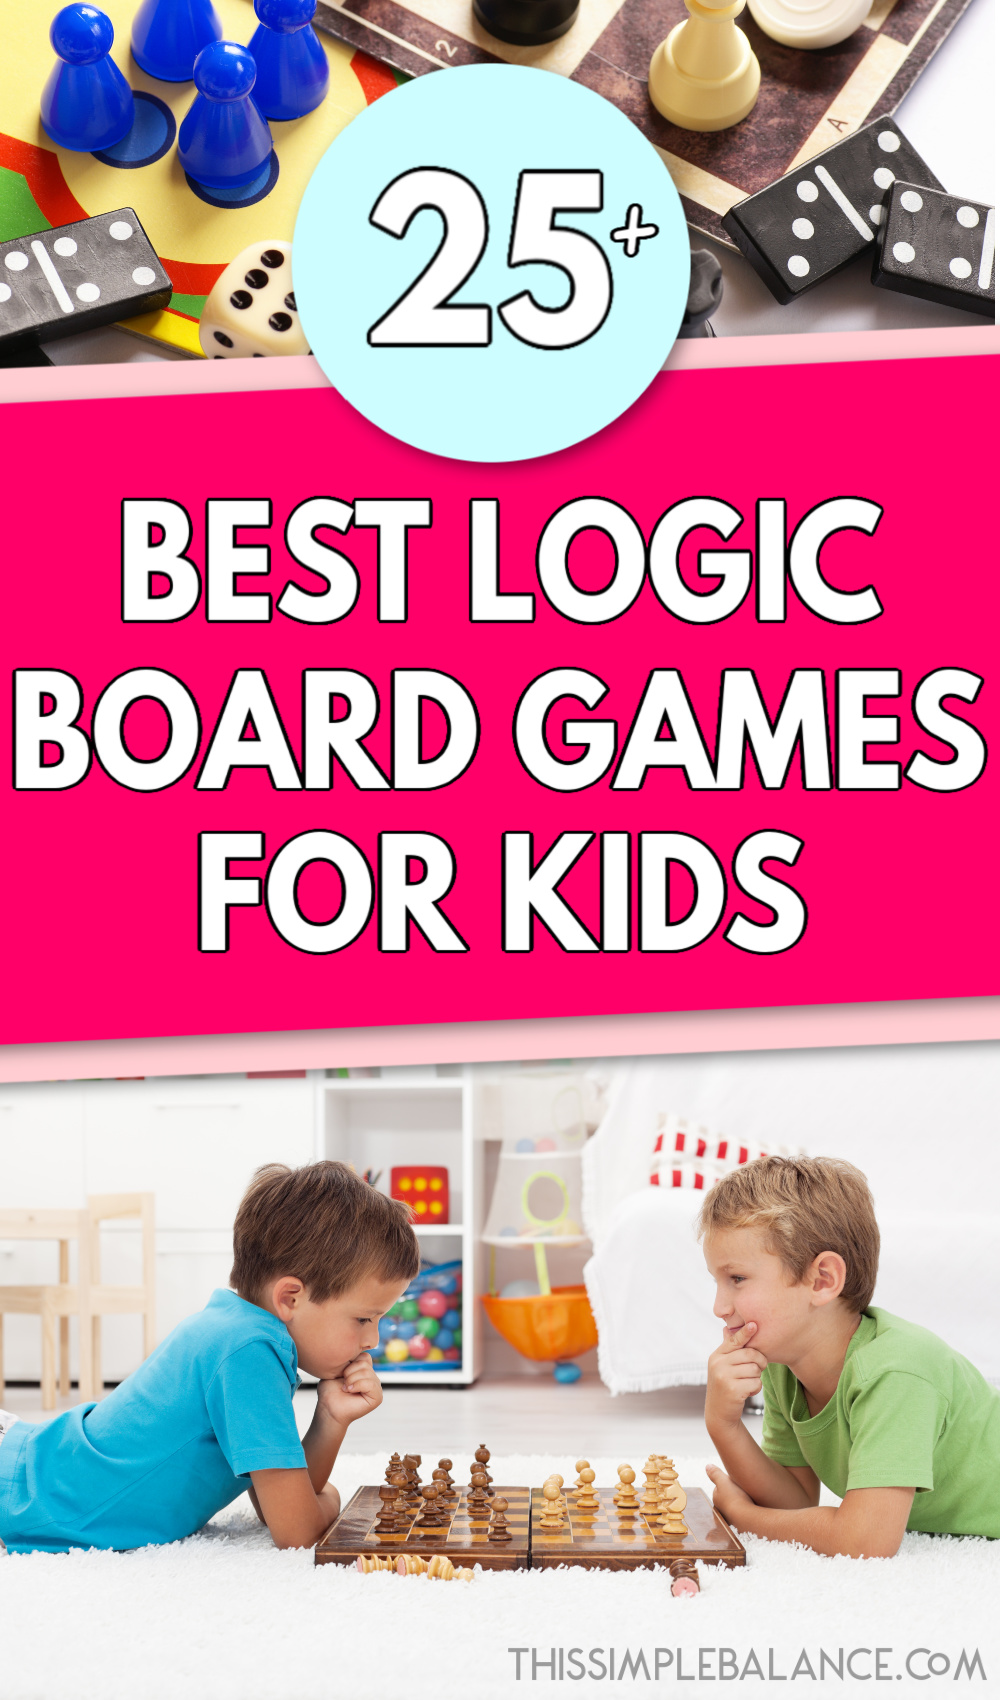 two young boys playing chess on white carpet, with text overlay, "25+ best logic board games for kids"